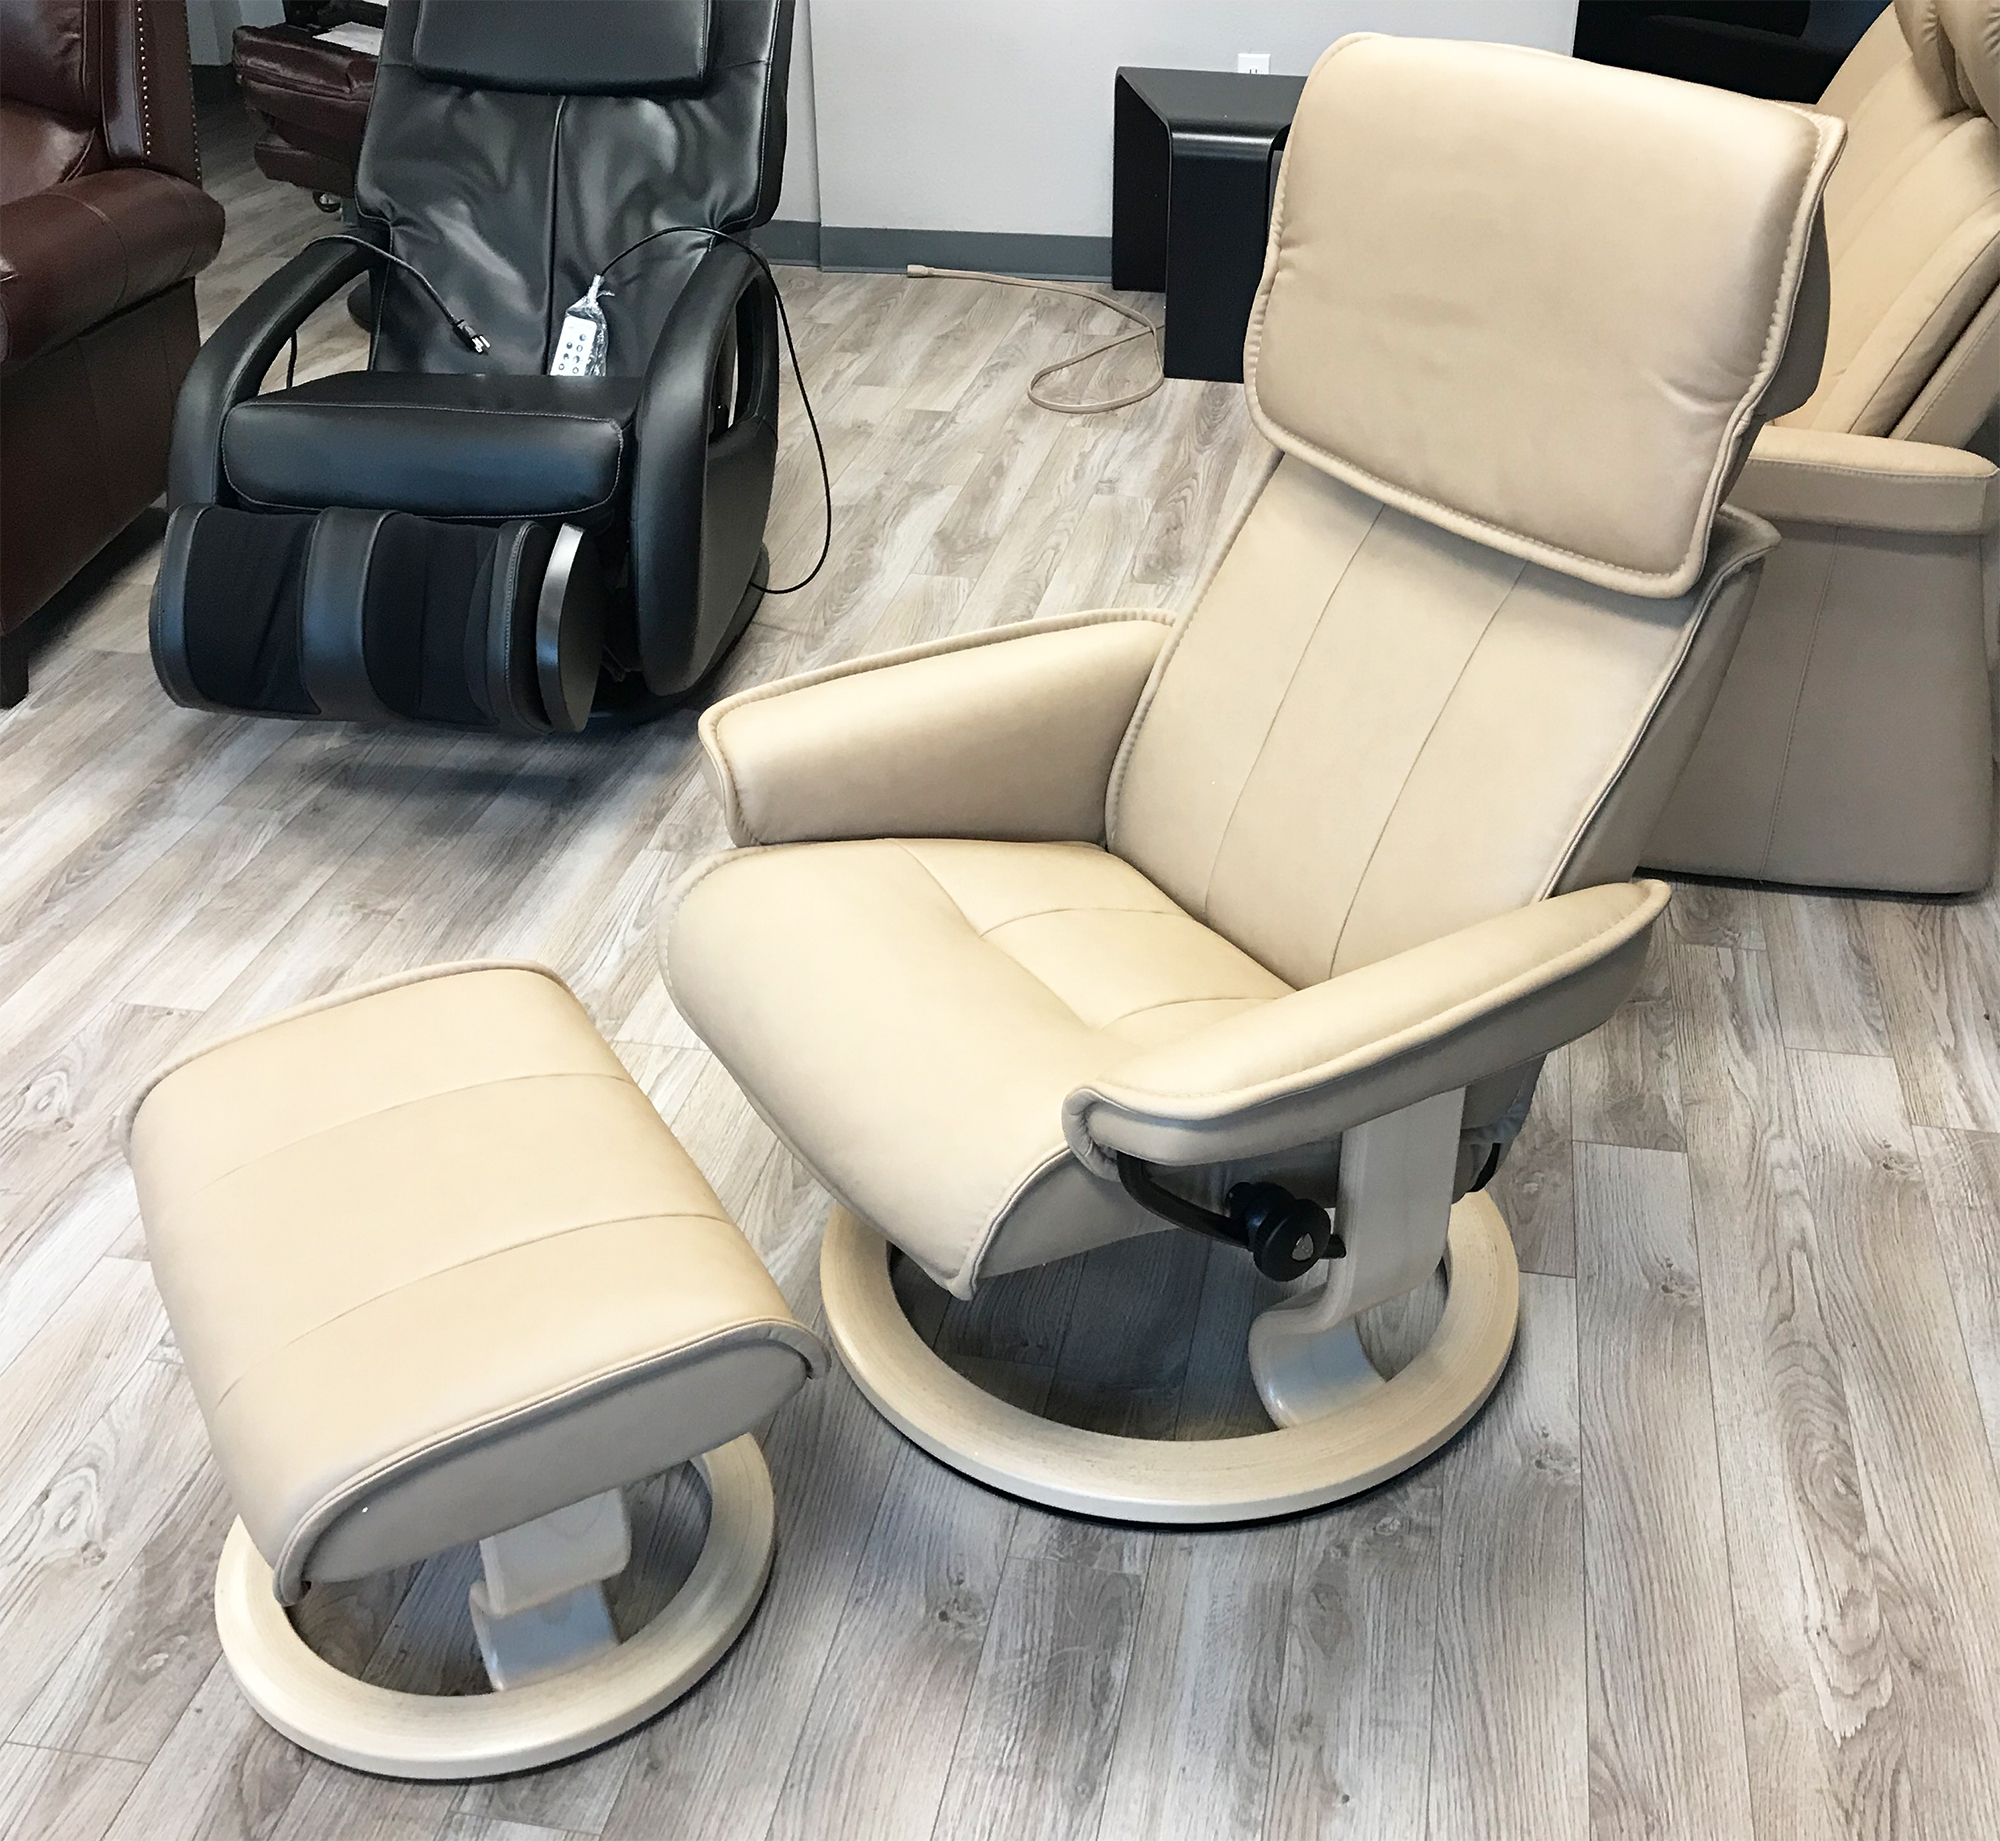 https://vitalityweb.com/Stressless-Chair/stressless_images/Stressless-Admiral-Recliner-Chair-Paloma-Sand-Leather-Natural-Wood-5.jpg